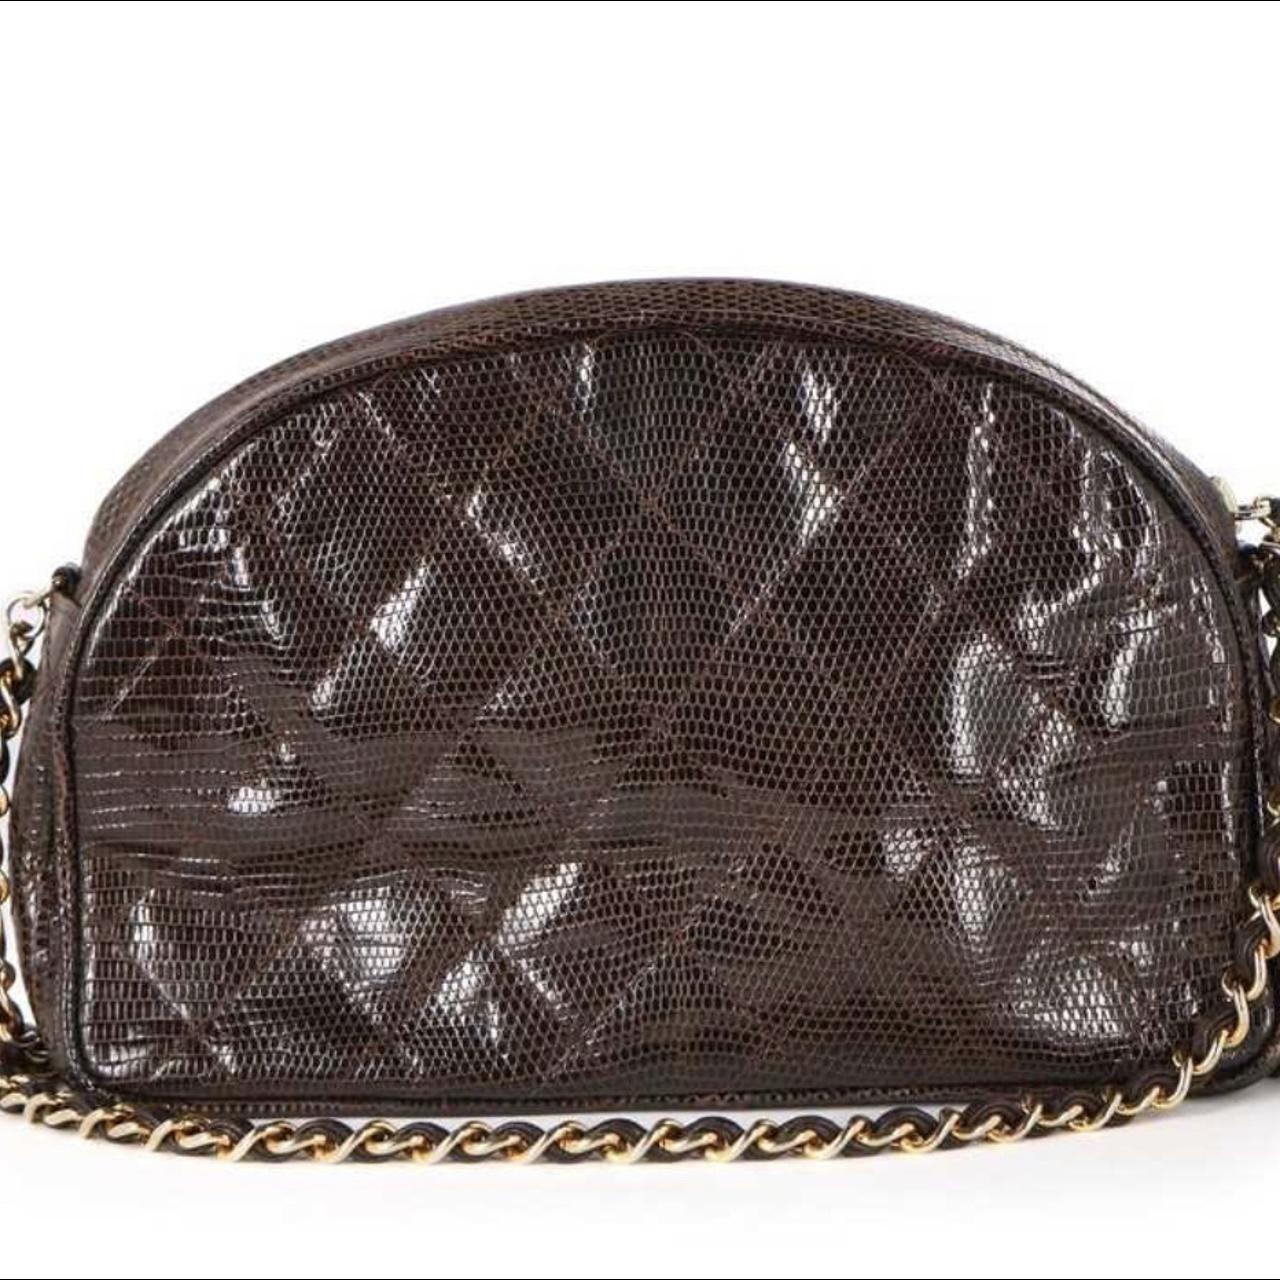 A Chanel quilted brown lizard skin bag, 1980s